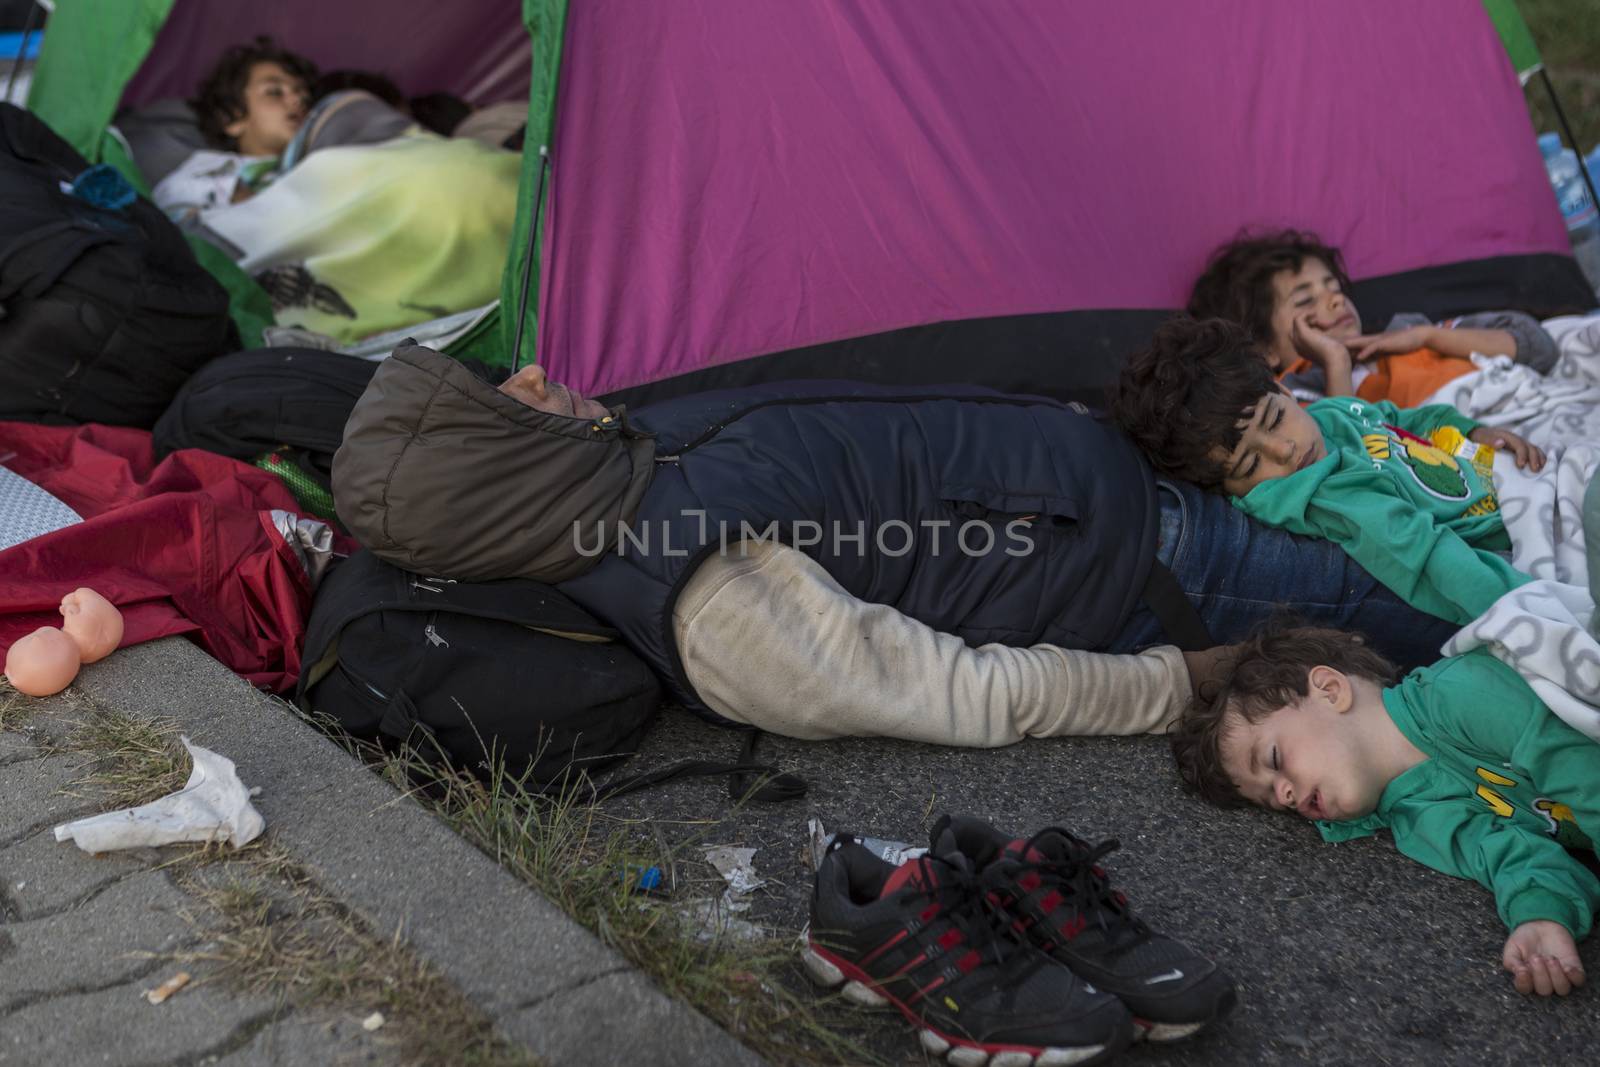 SERBIA, Horgos: Refugees wait at the Serbia-Hungary border, blocking traffic, after Hungary closed the border crossing on September 16, 2015.****Restriction: Photo is not to be sold in Russia or Asia****